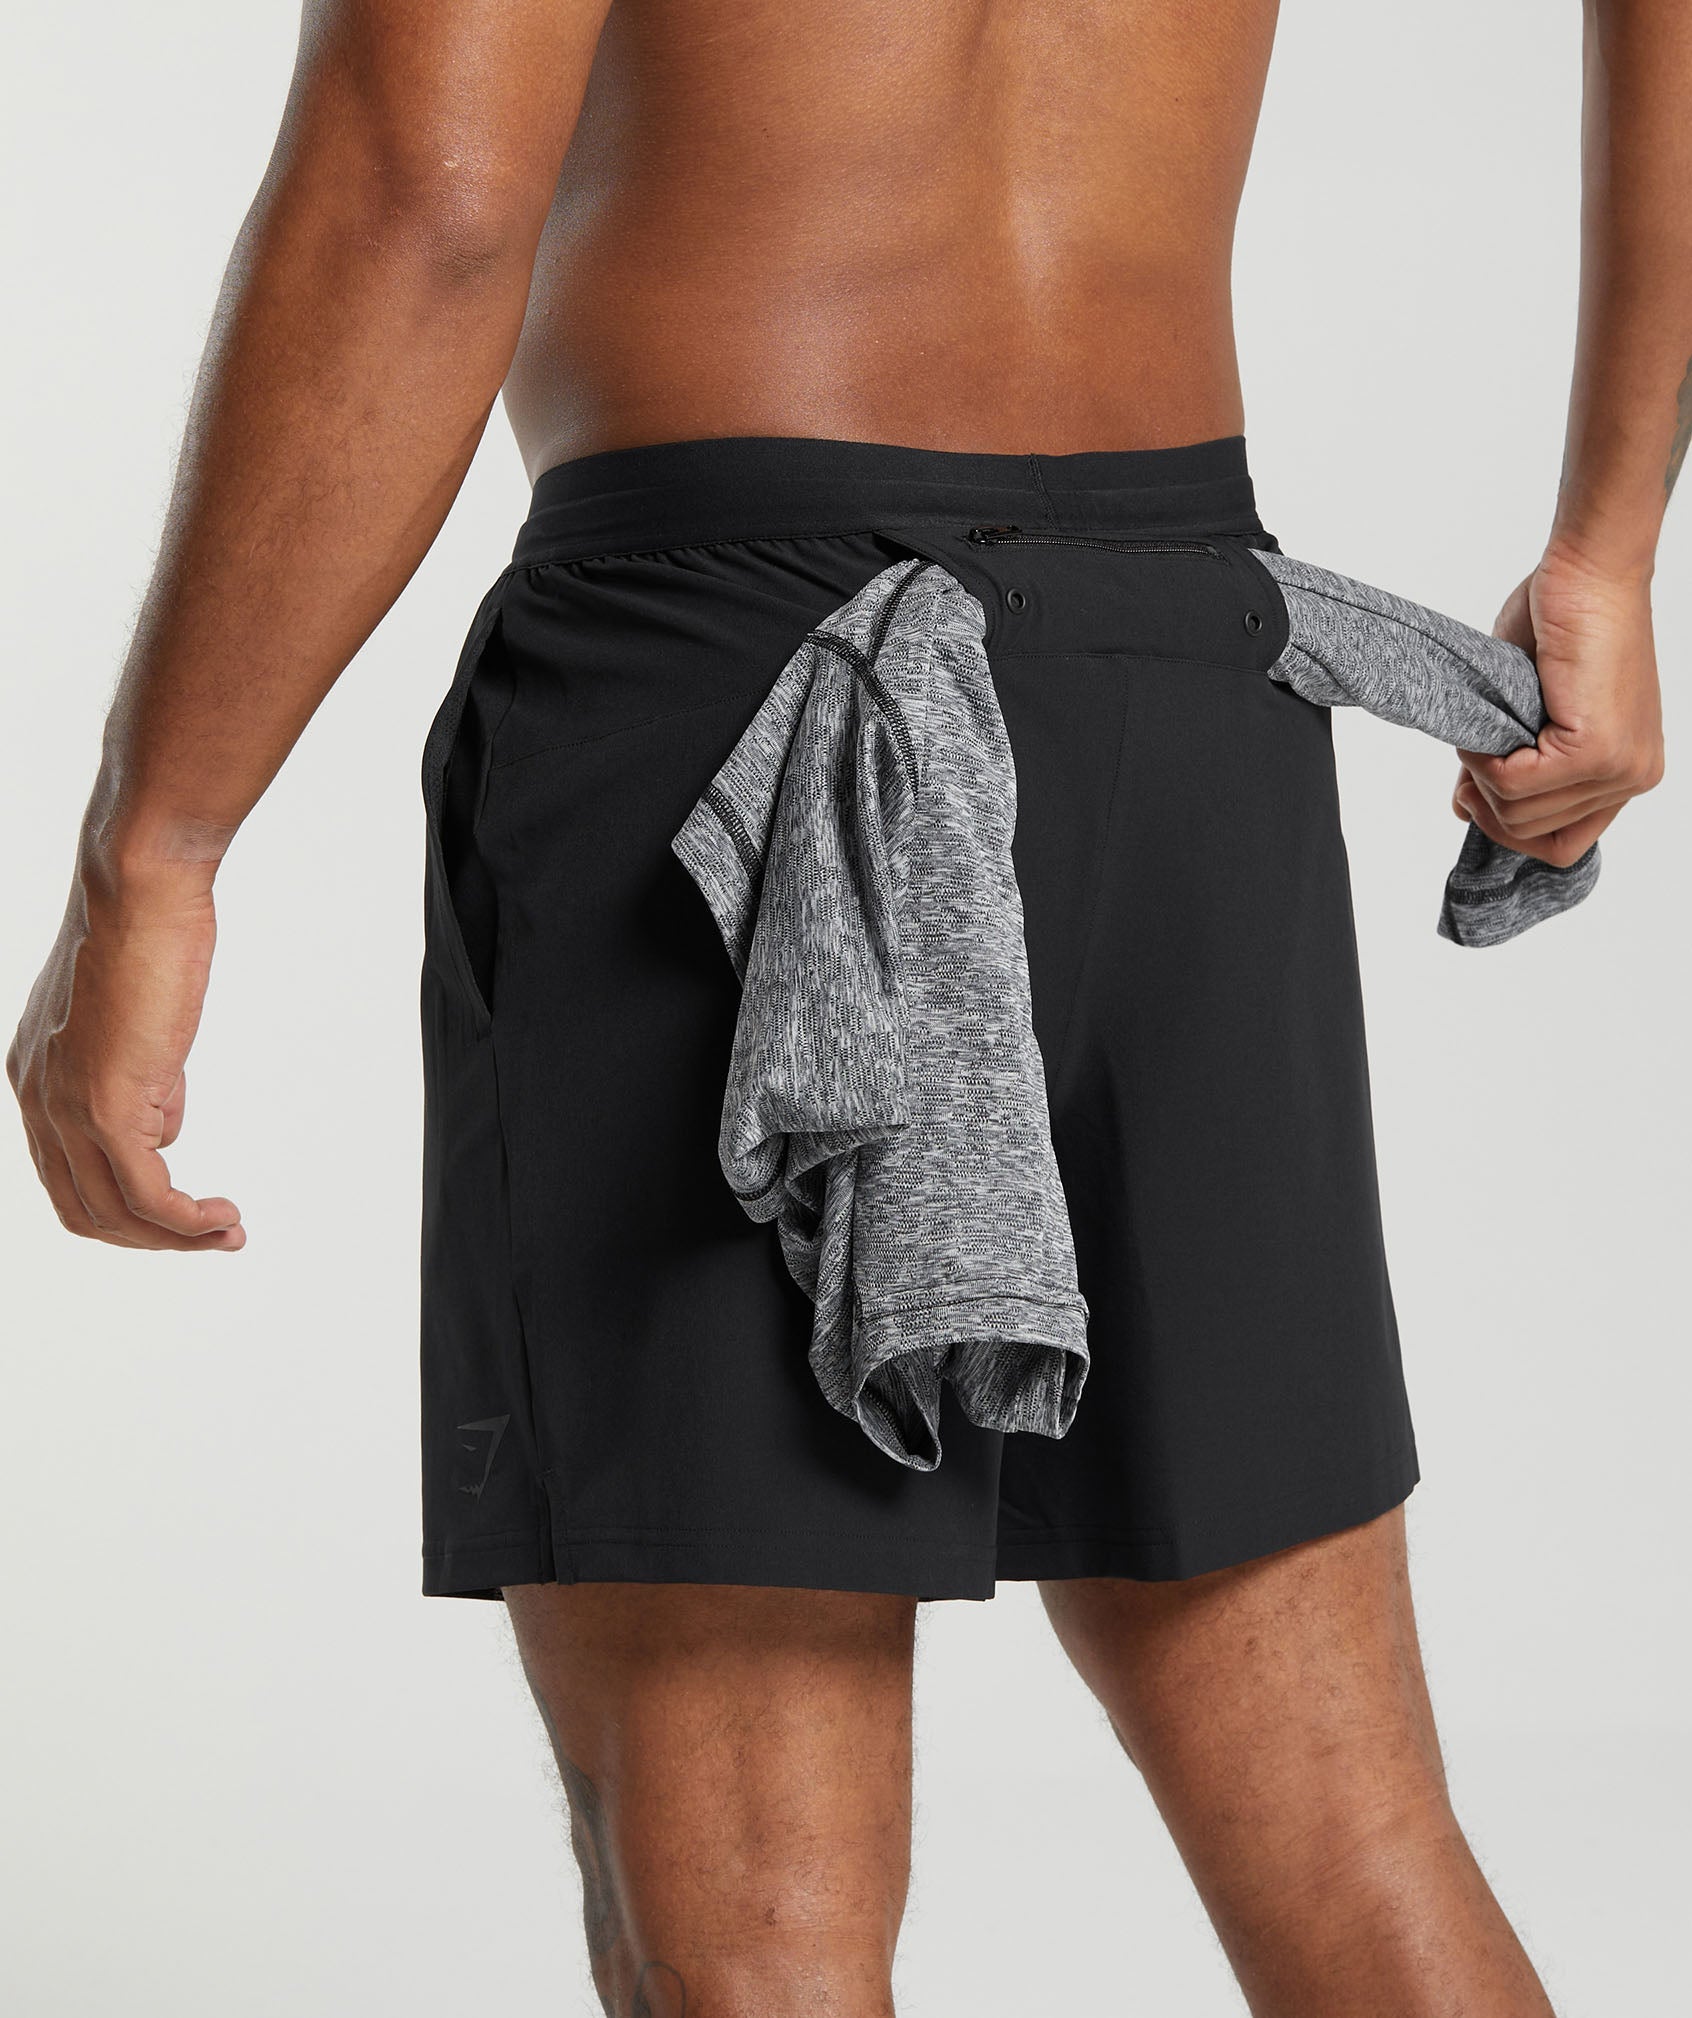 Land to Water 6" Shorts in Black - view 7